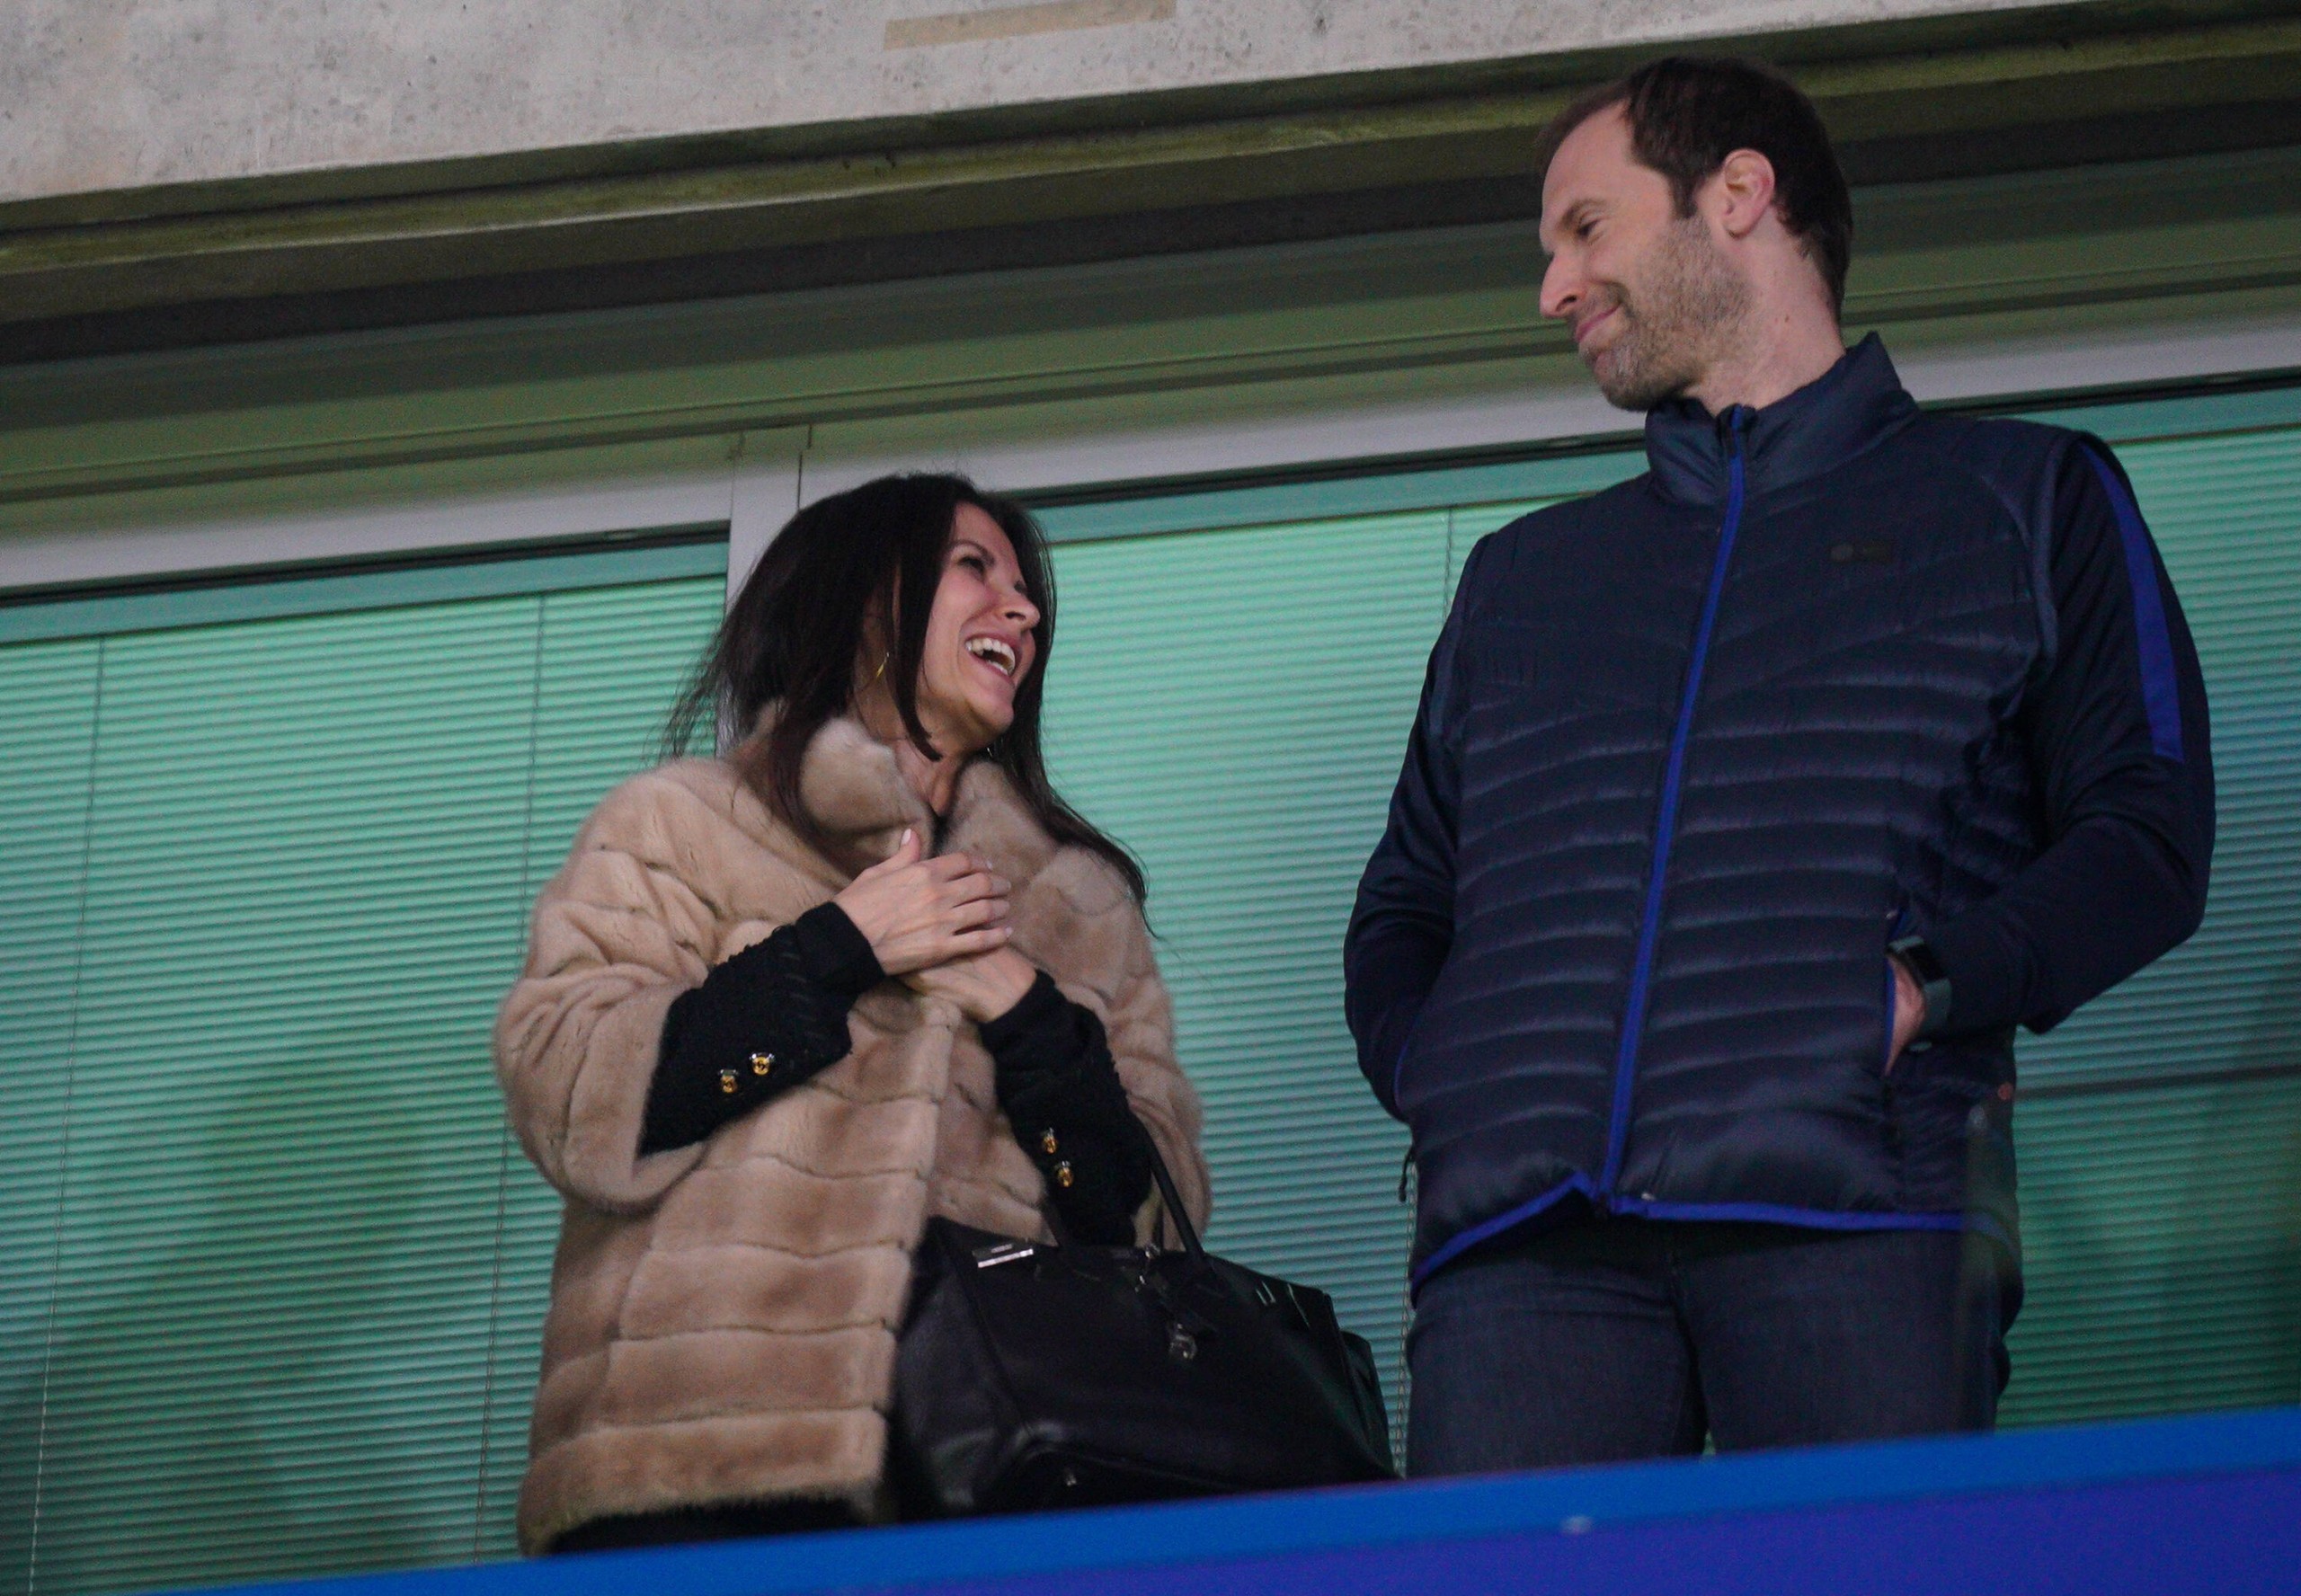 Chelsea director Marina Granovskaia & Petr Cech at full time during the FA Cup 5th round match between Chelsea and Liverpool at Stamford Bridge, London, England on 3 March 2020. PUBLICATIONxNOTxINxUK Copyright: xAndyxRowlandx PMI-3421-0017